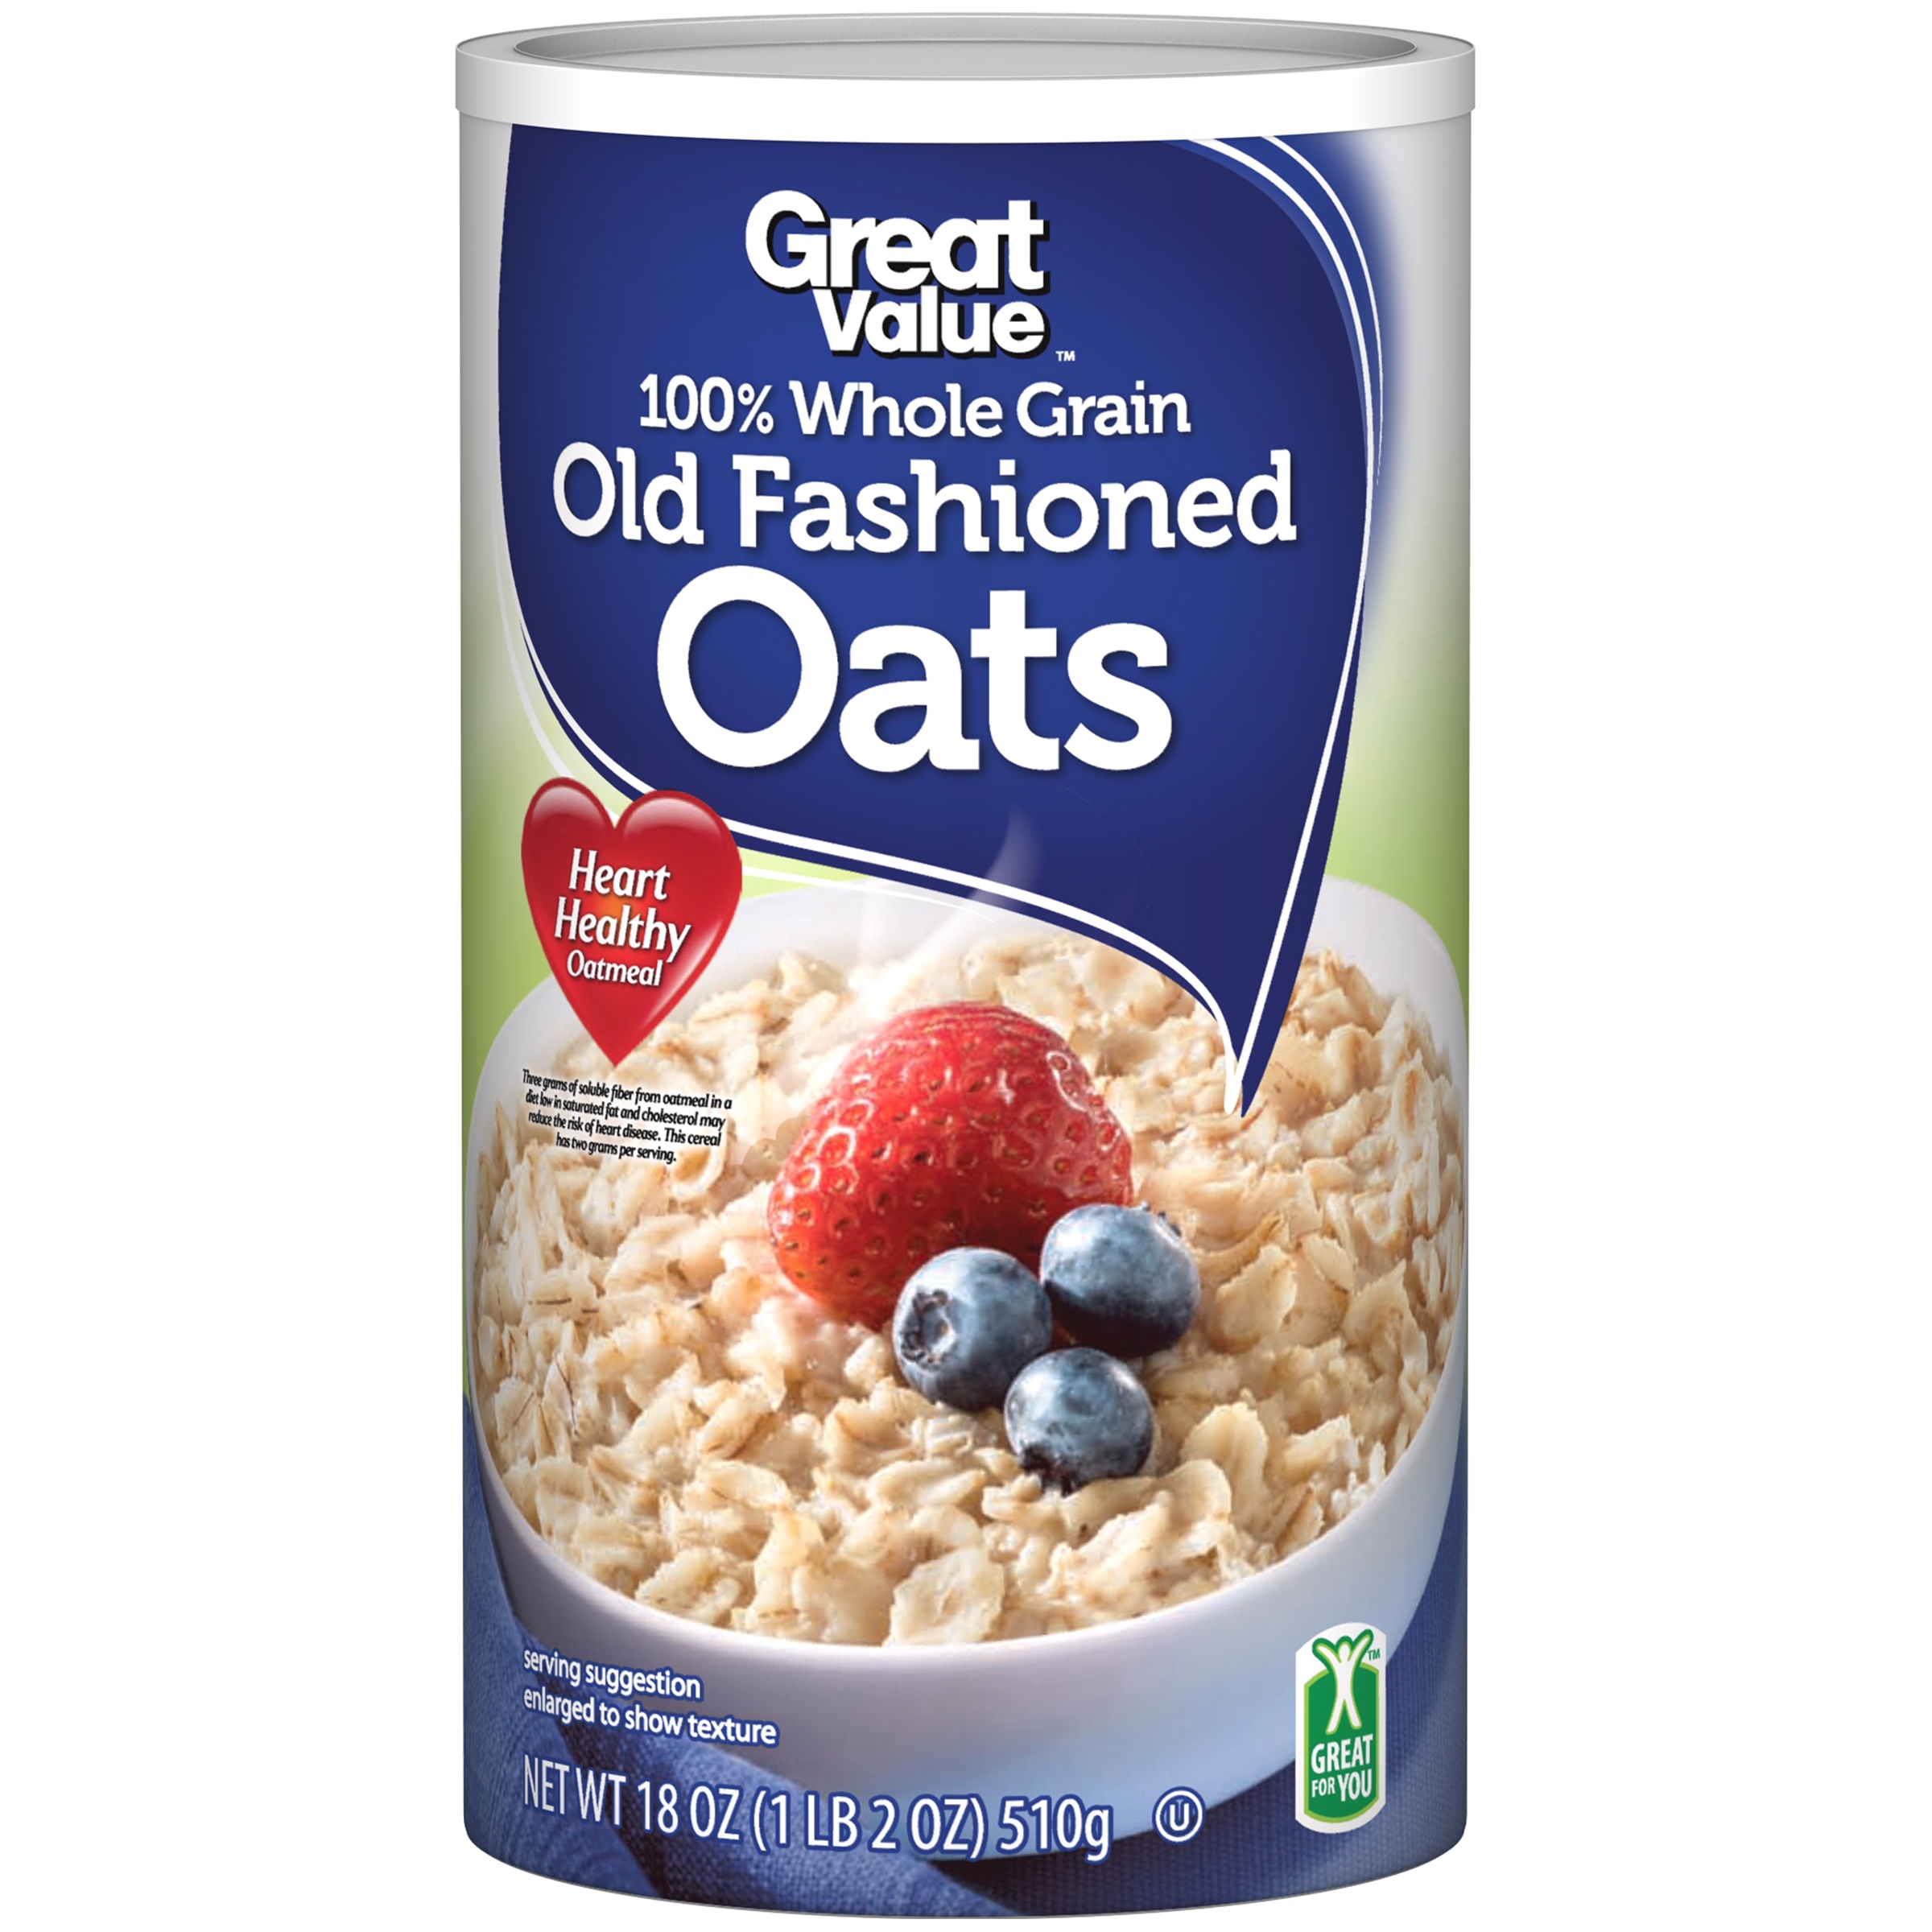 (4 Pack) Great Value 100% Whole Grain Old Fashioned Oats, 18 Oz